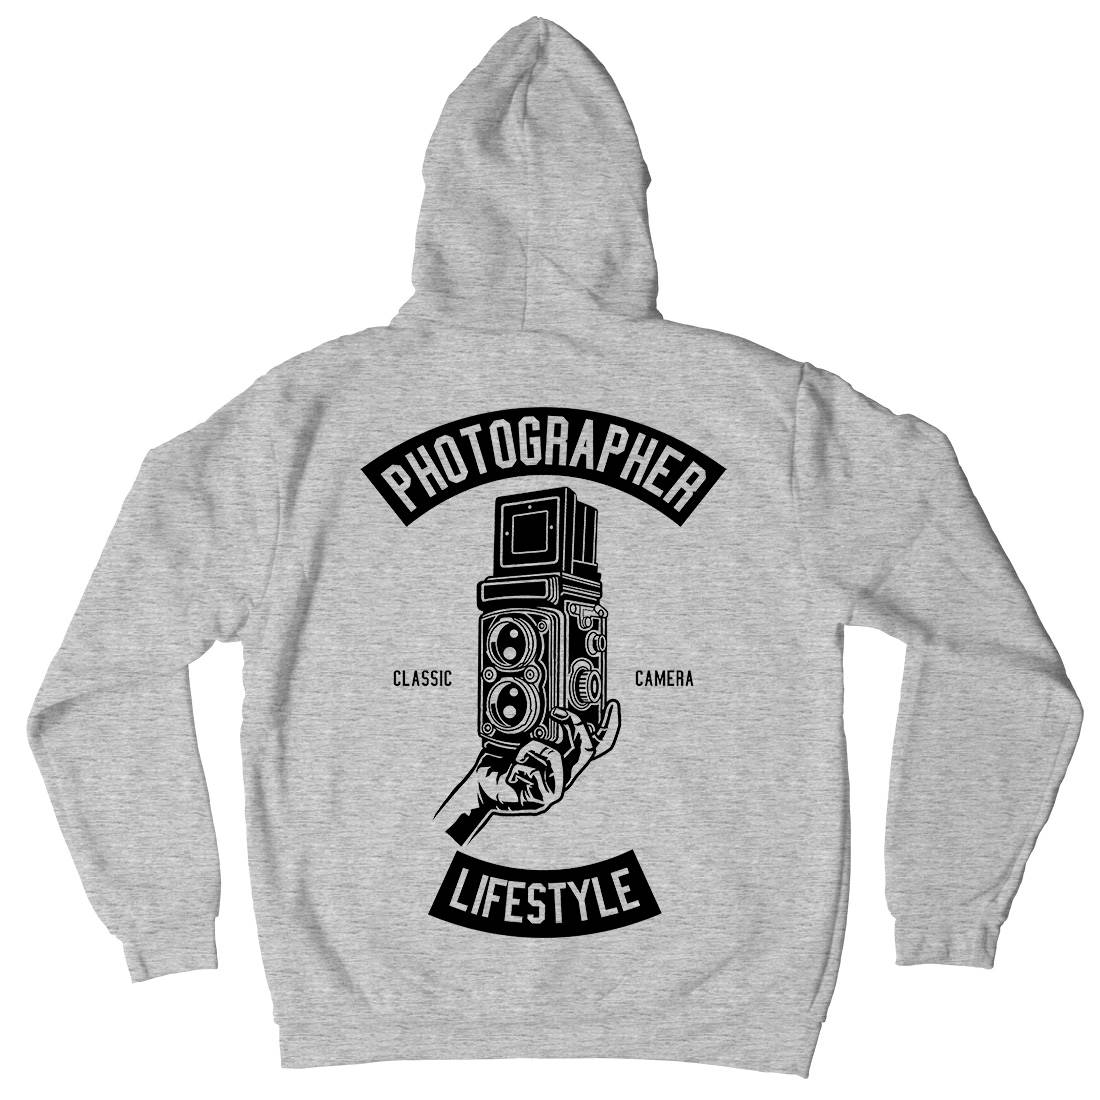 Photographer Lifestyle Mens Hoodie With Pocket Media B597